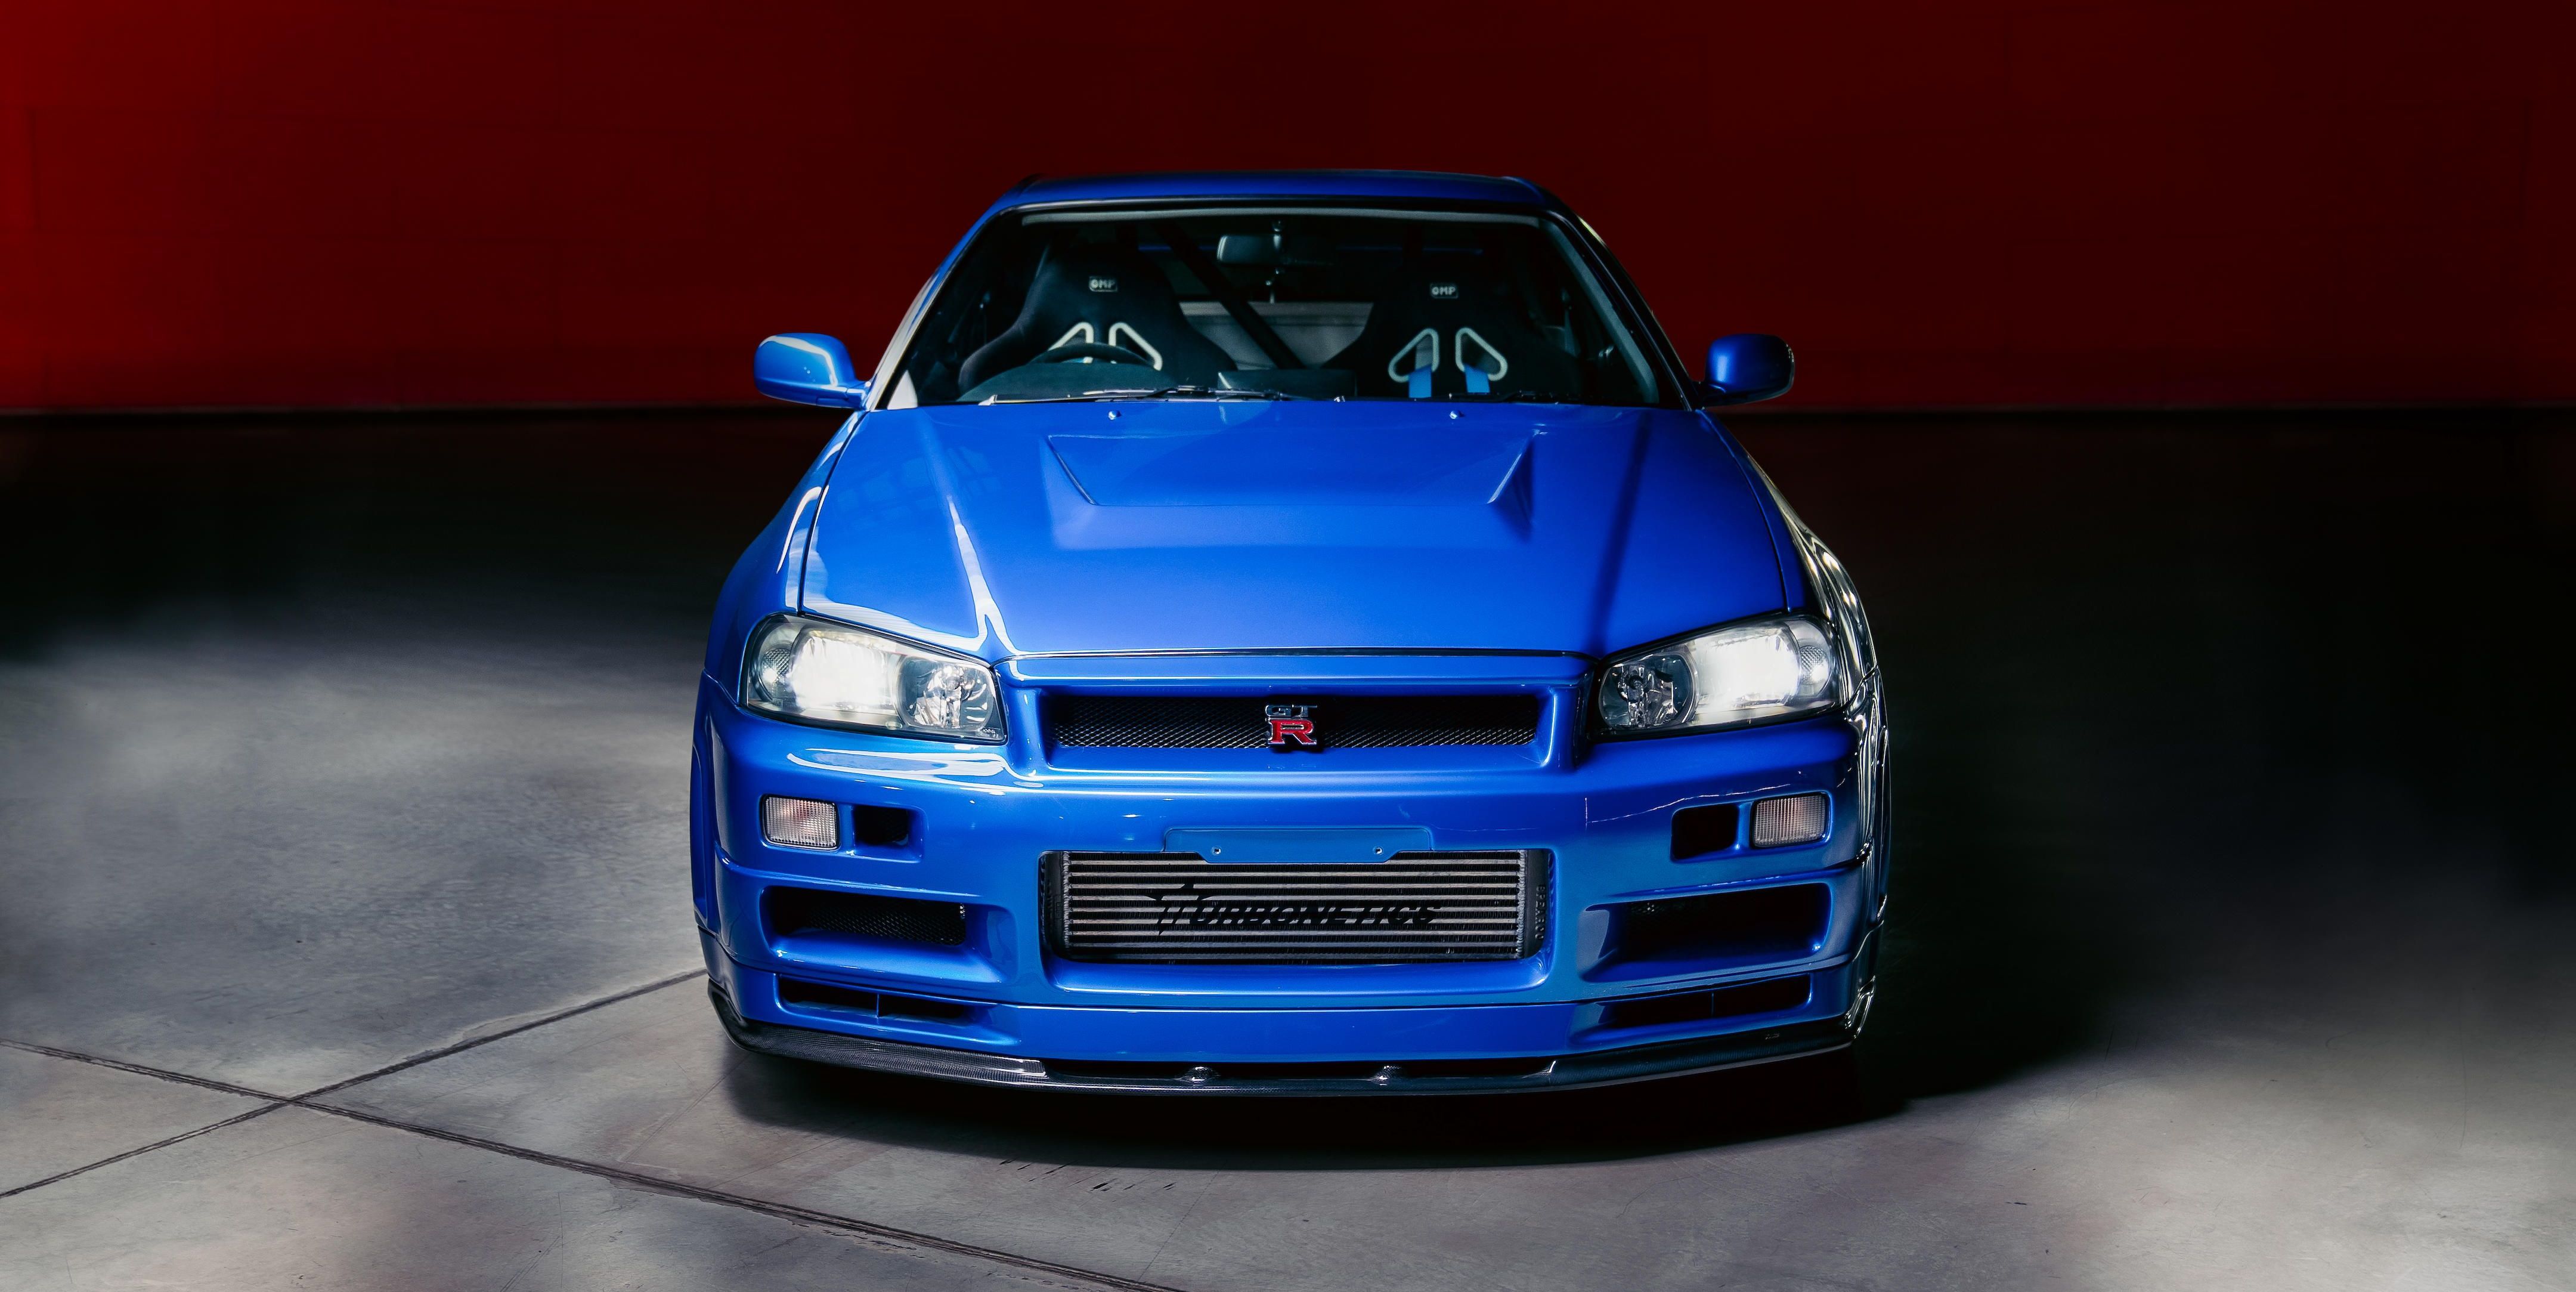 Paul Walker's Fast and Furious R34 Skyline GT-R Just Sold for $1.357 Million